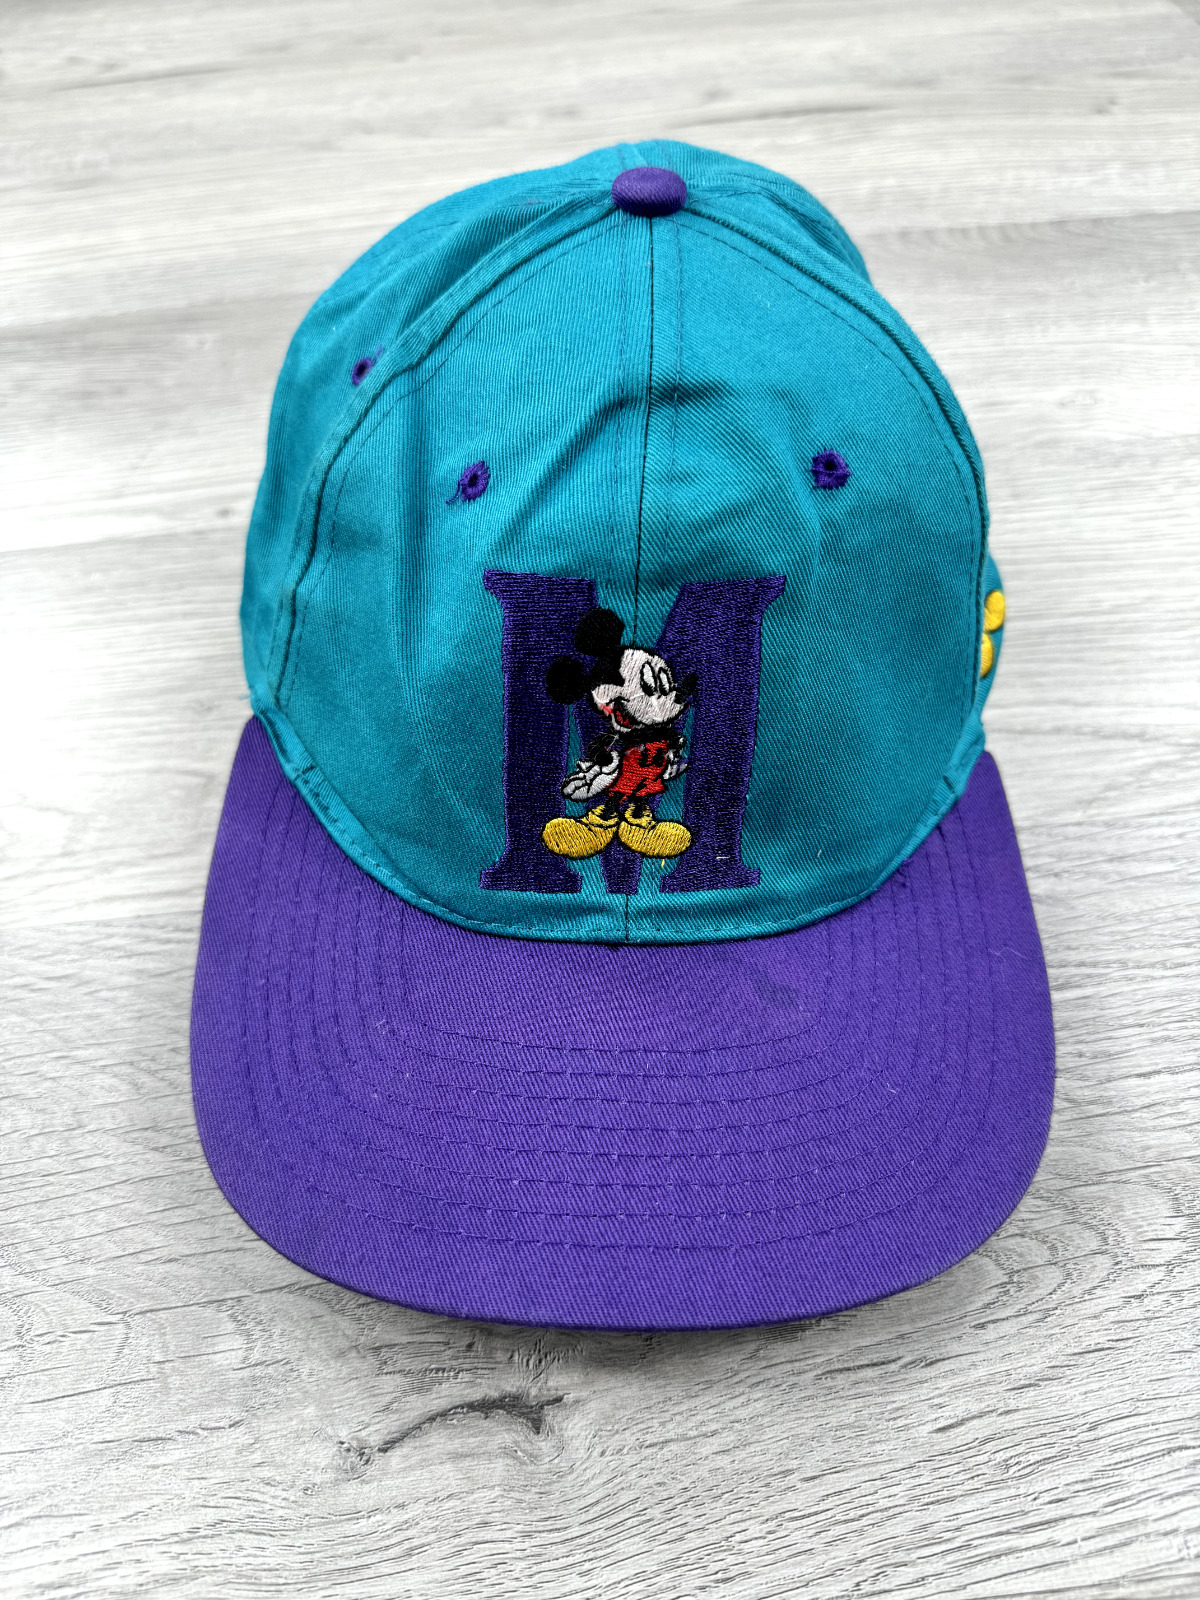 Vintage Mickey Mouse Hat Cap Adjustable Blue Colorblock Embroidered Disney 90s